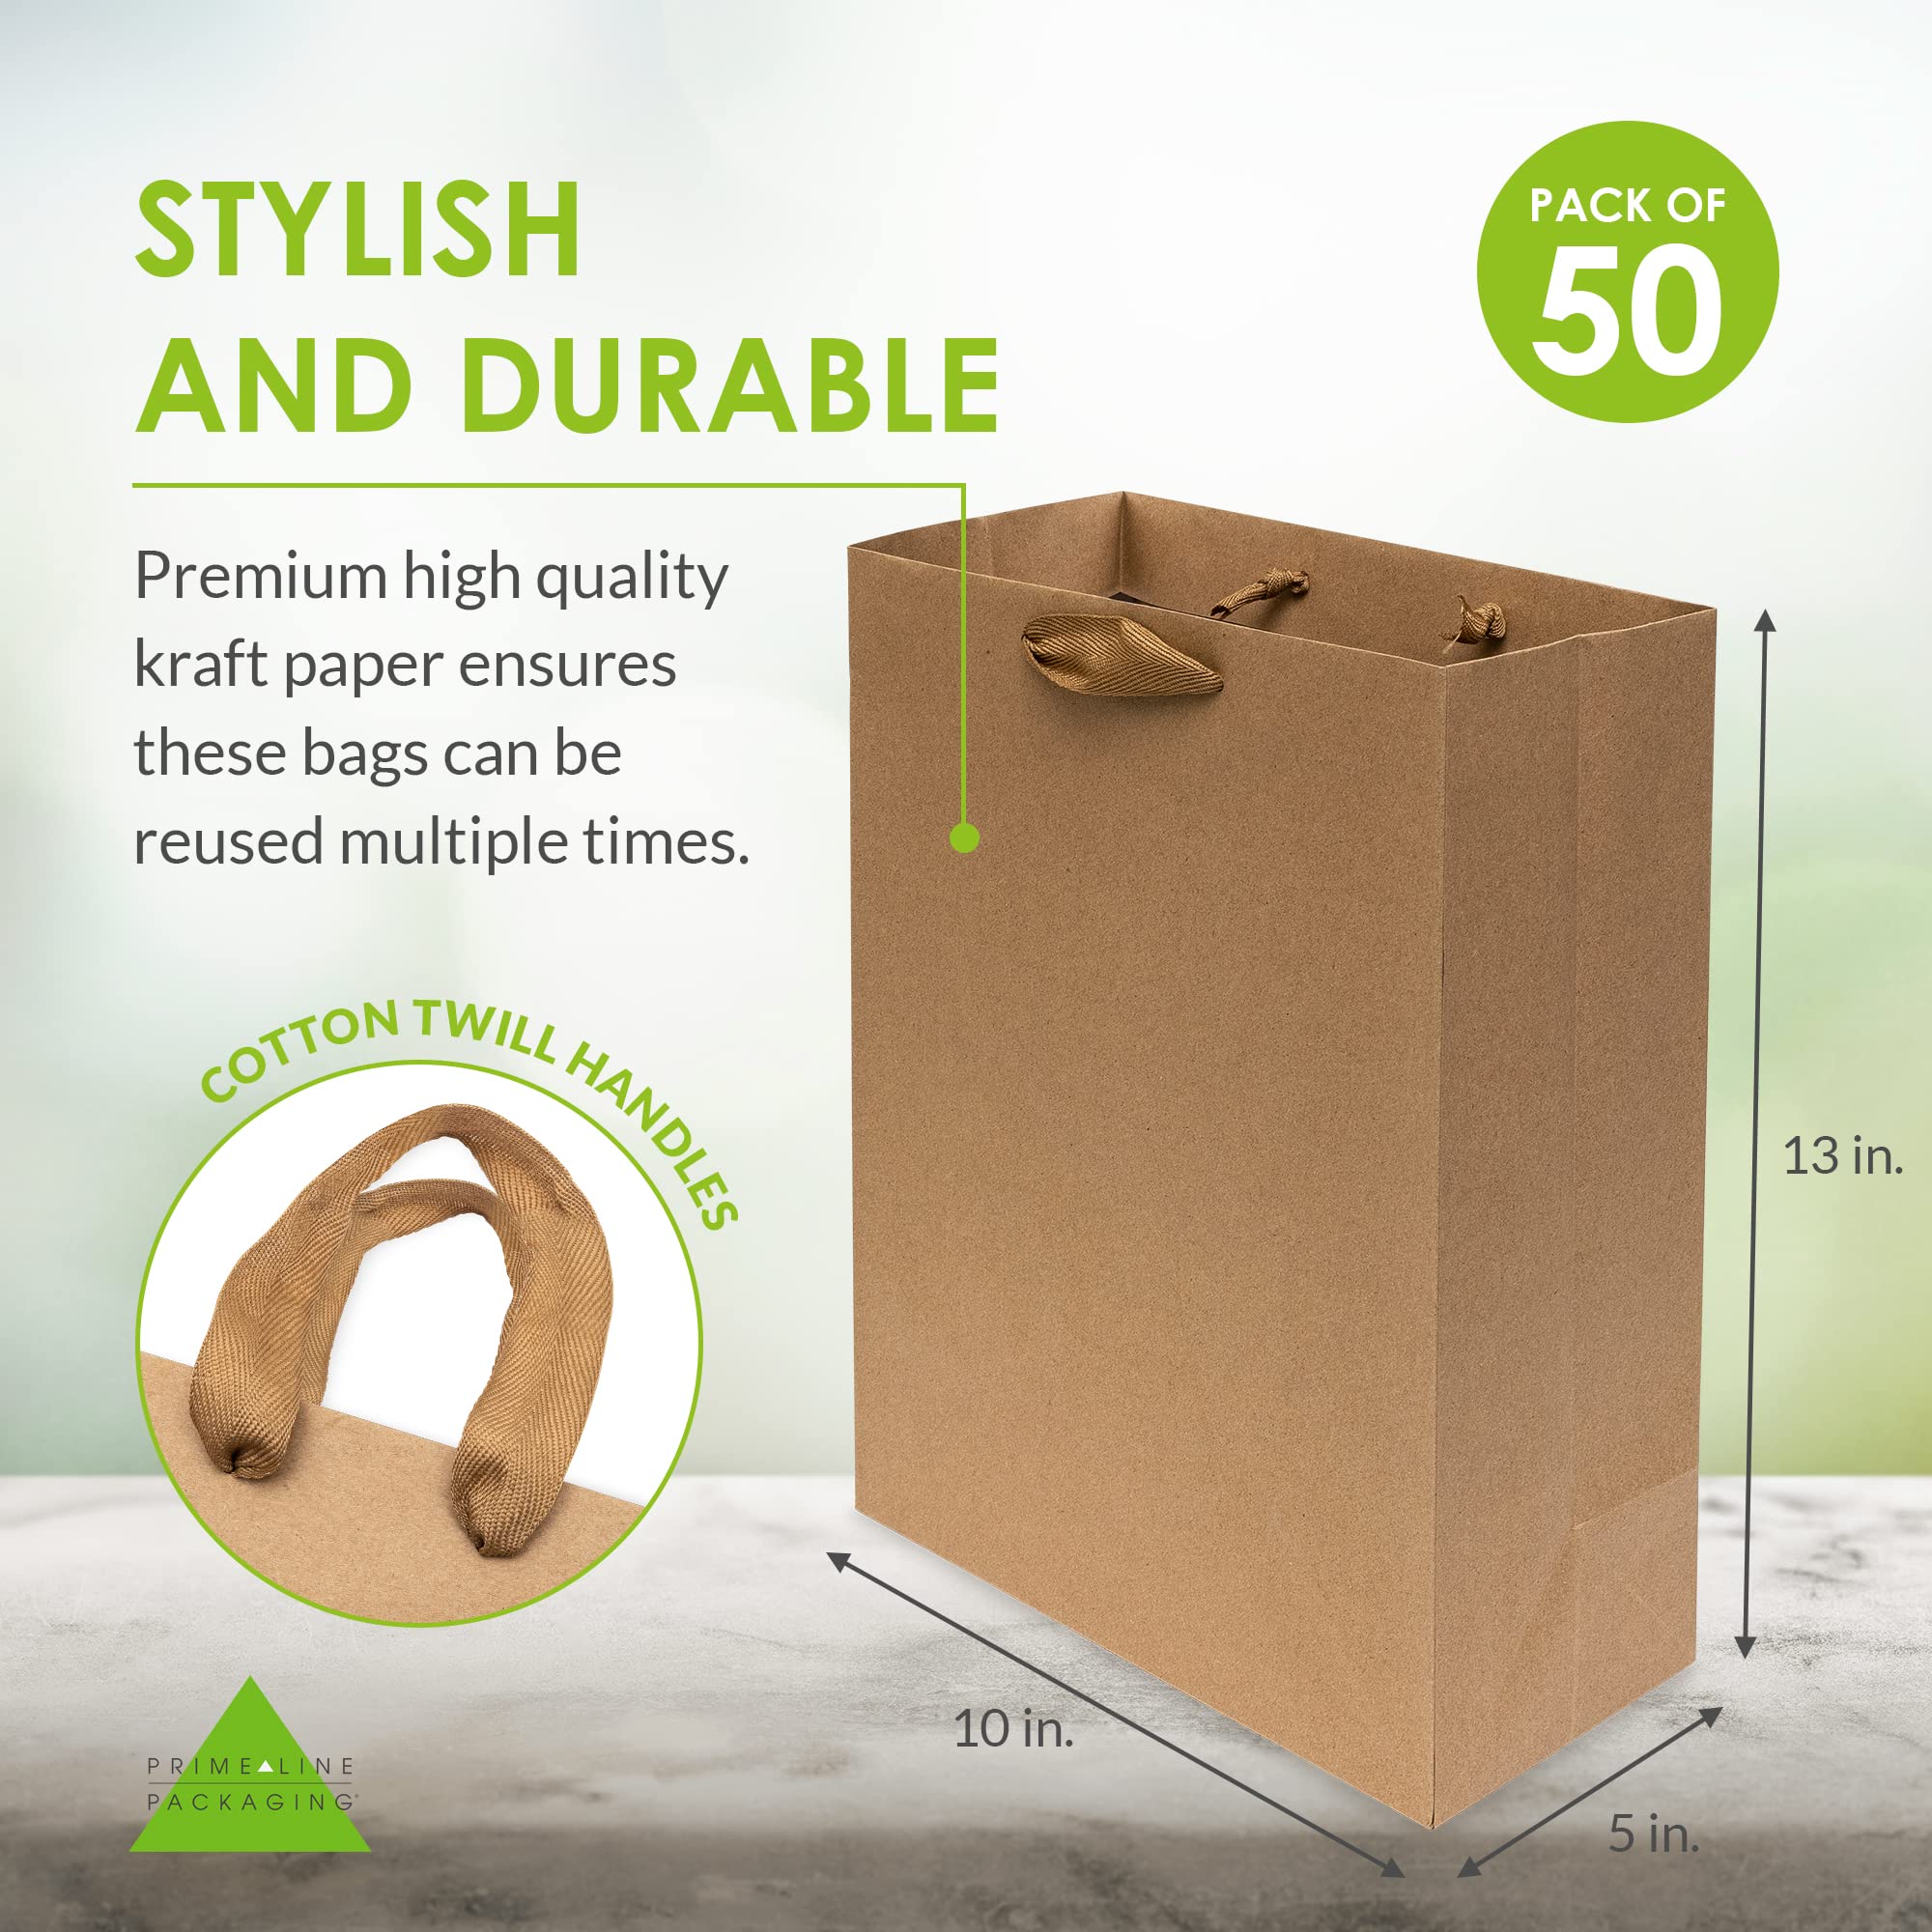 Brown Gift Bags with Handles - 10x5x13 50 Pack Medium Size Boutique Bags, Luxury Ribbon Handle Kraft Paper Shopping Bags for Small Business, Wedding, Party Favor Bags, Gift Wrapping, Goodie Bags, Bulk  - Very Good